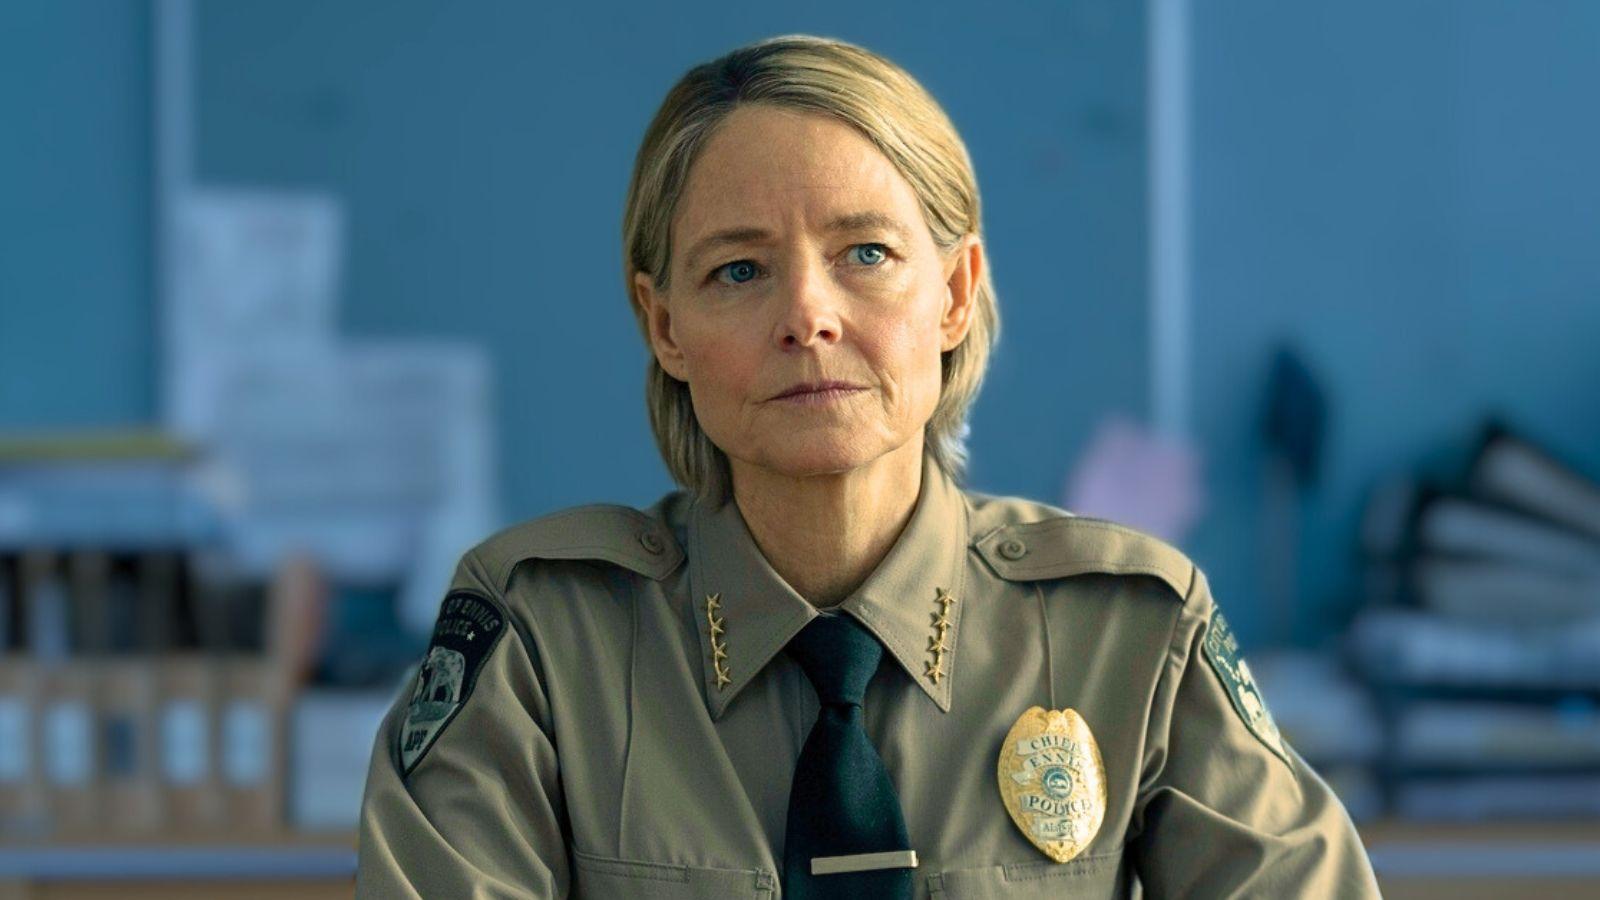 Jodie Foster in True Detective Night Country sits in a police station in her officer uniform.